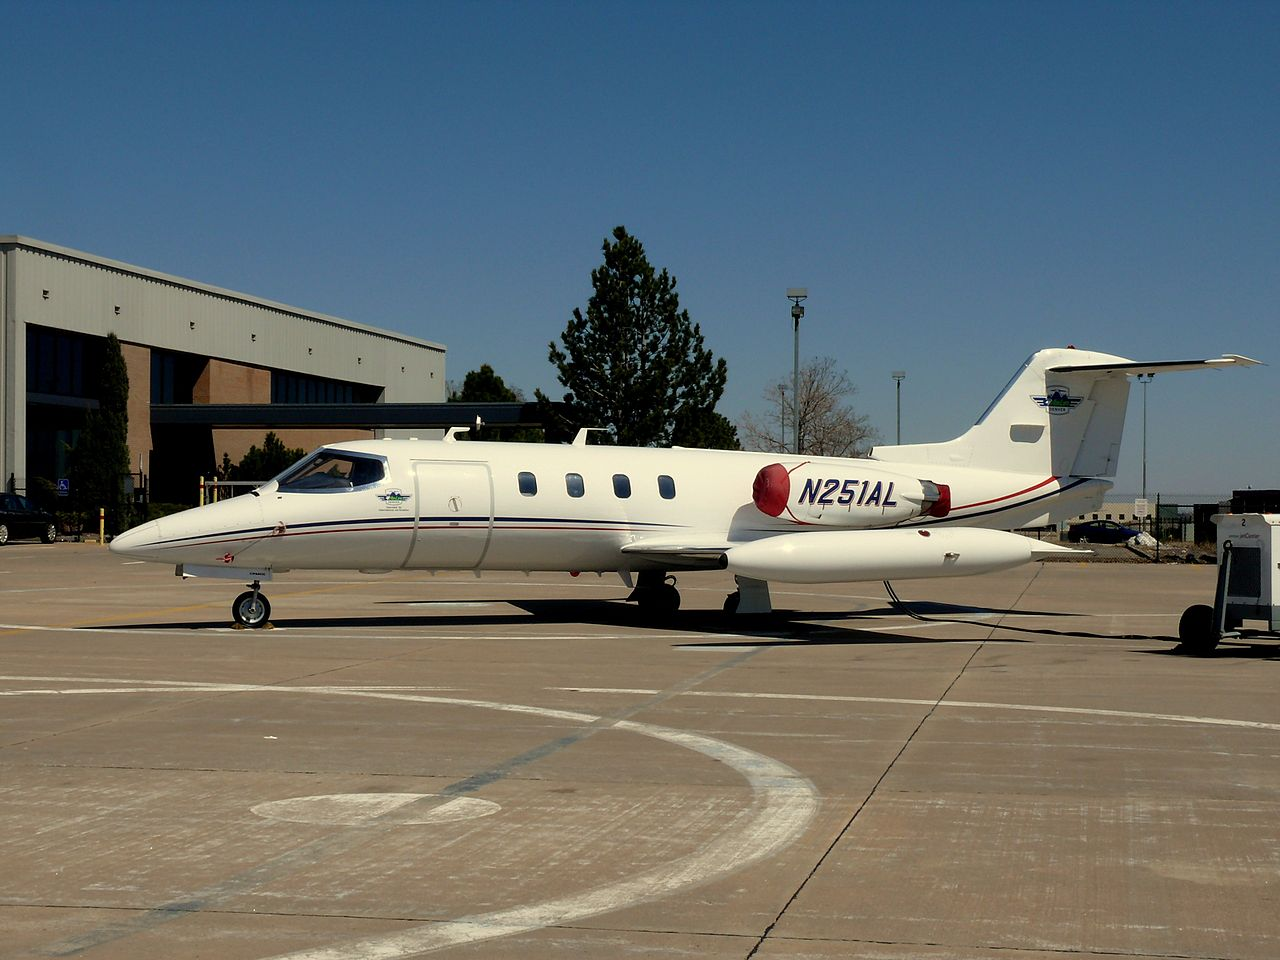 Learjet 25 parked on tarmac at an airport by some hangars.